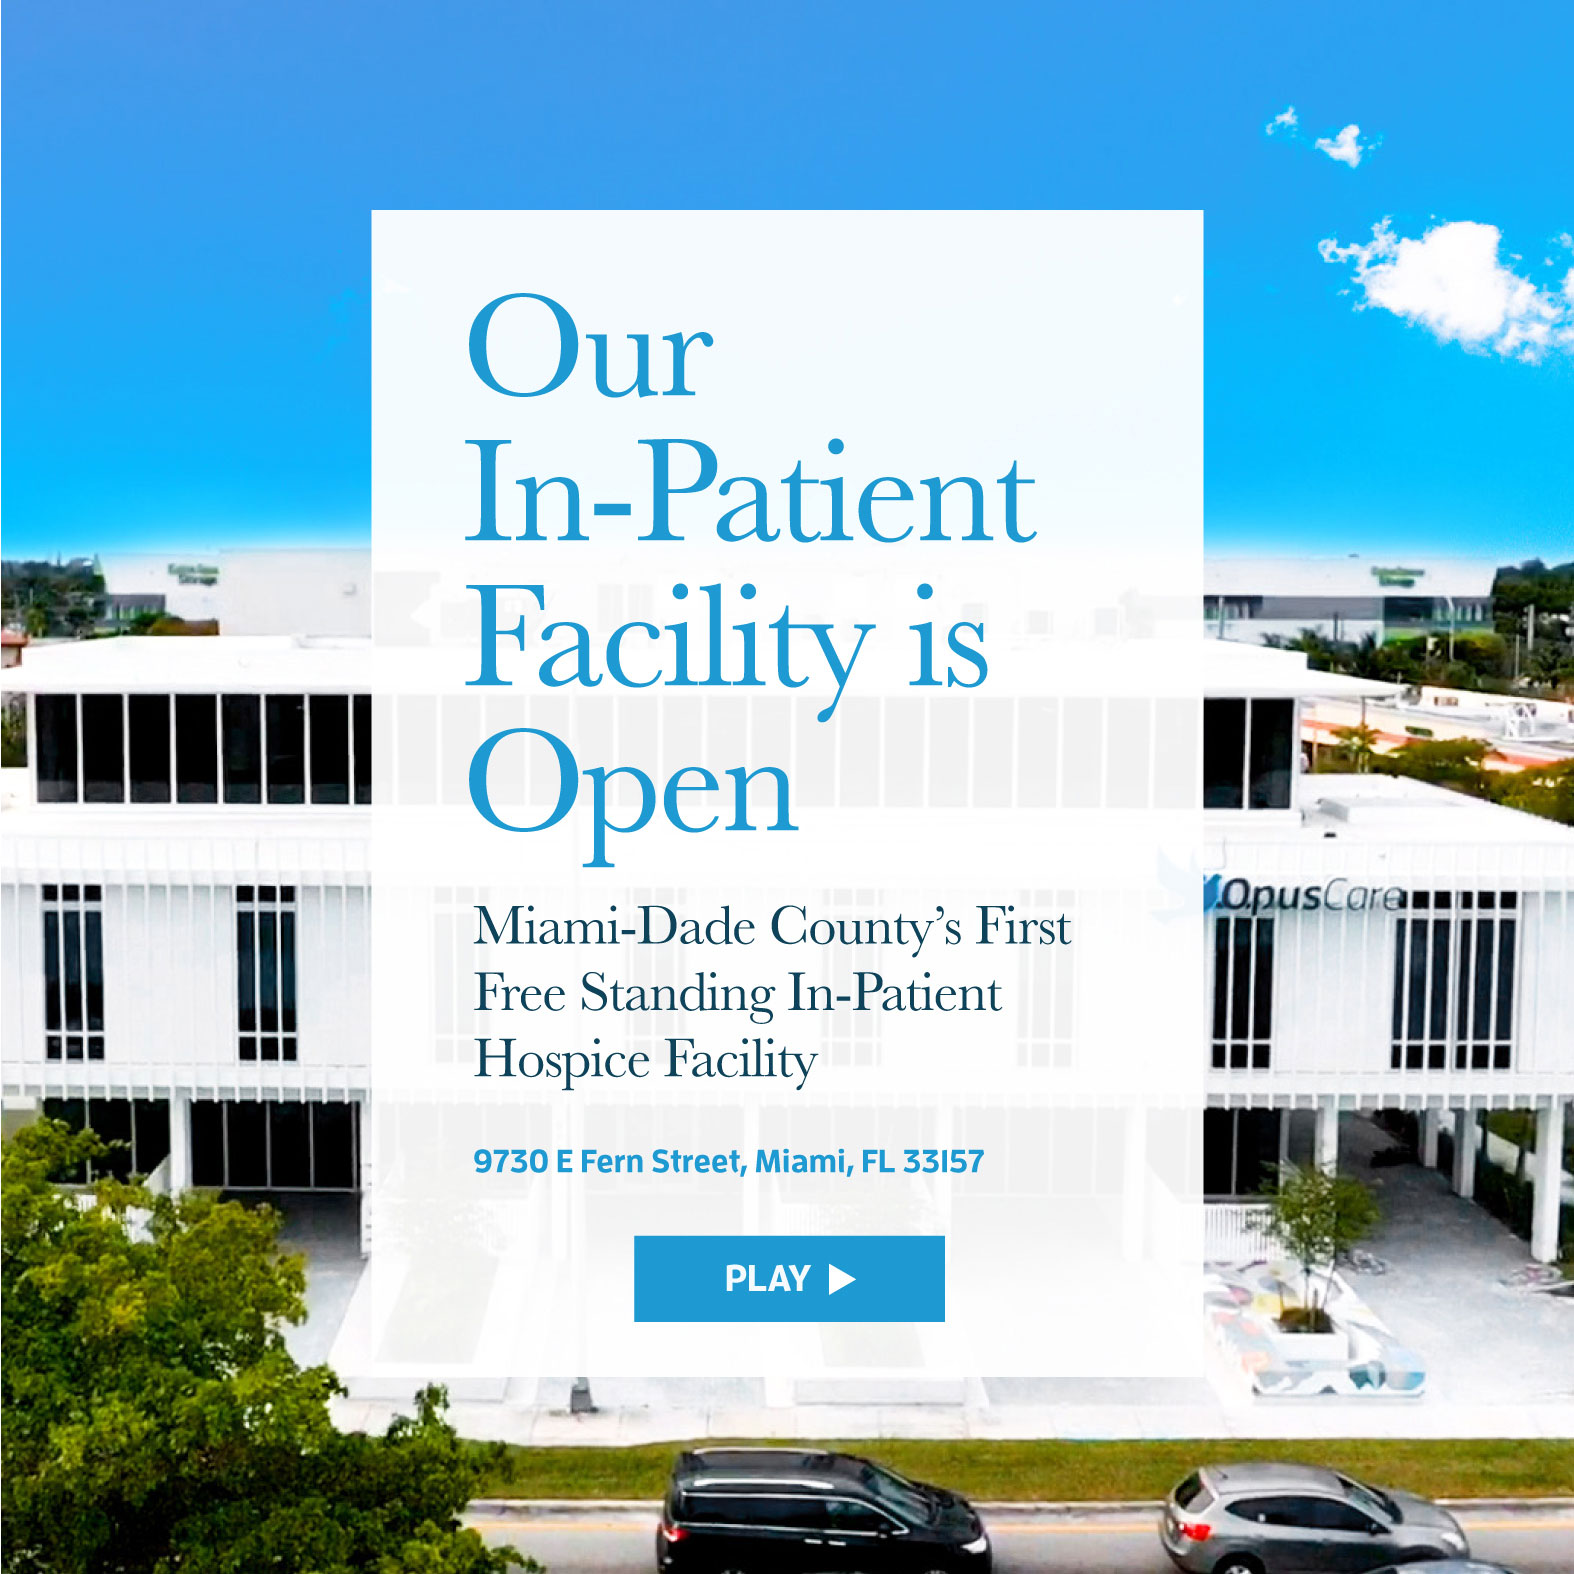 Our In-Patient Facility is Open. Miami-Date County's First Free Standing In-Patient Hospicy Facility 9730 E Fern Street, Miami FL 33157